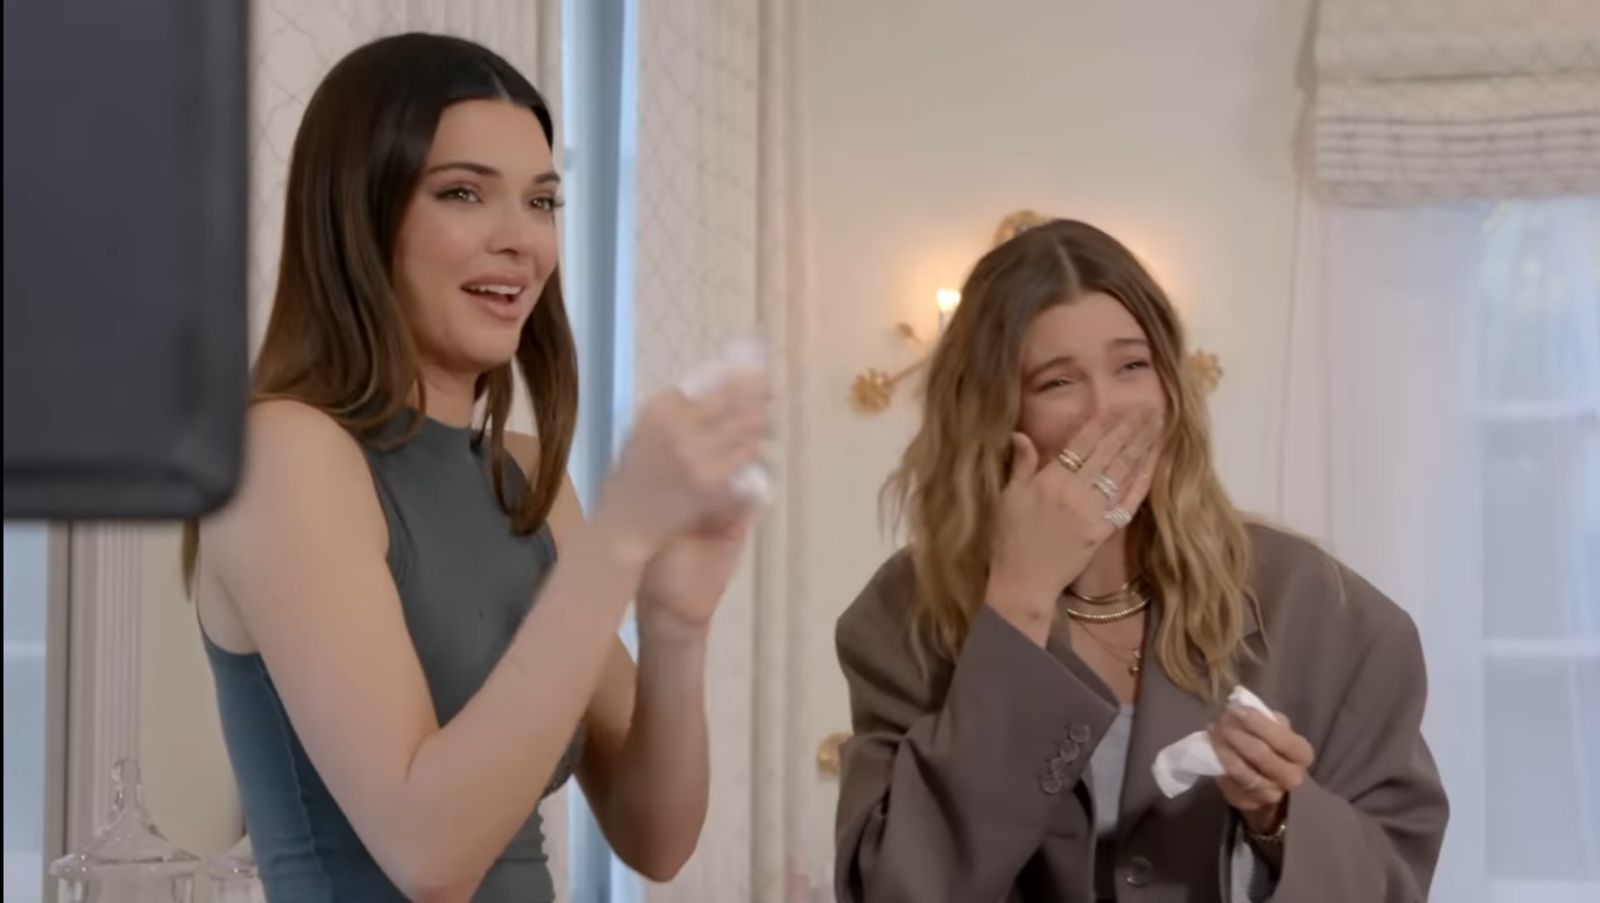 Kendall Jenner & Hailey Bieber on WHO’S IN MY BATHROOM?